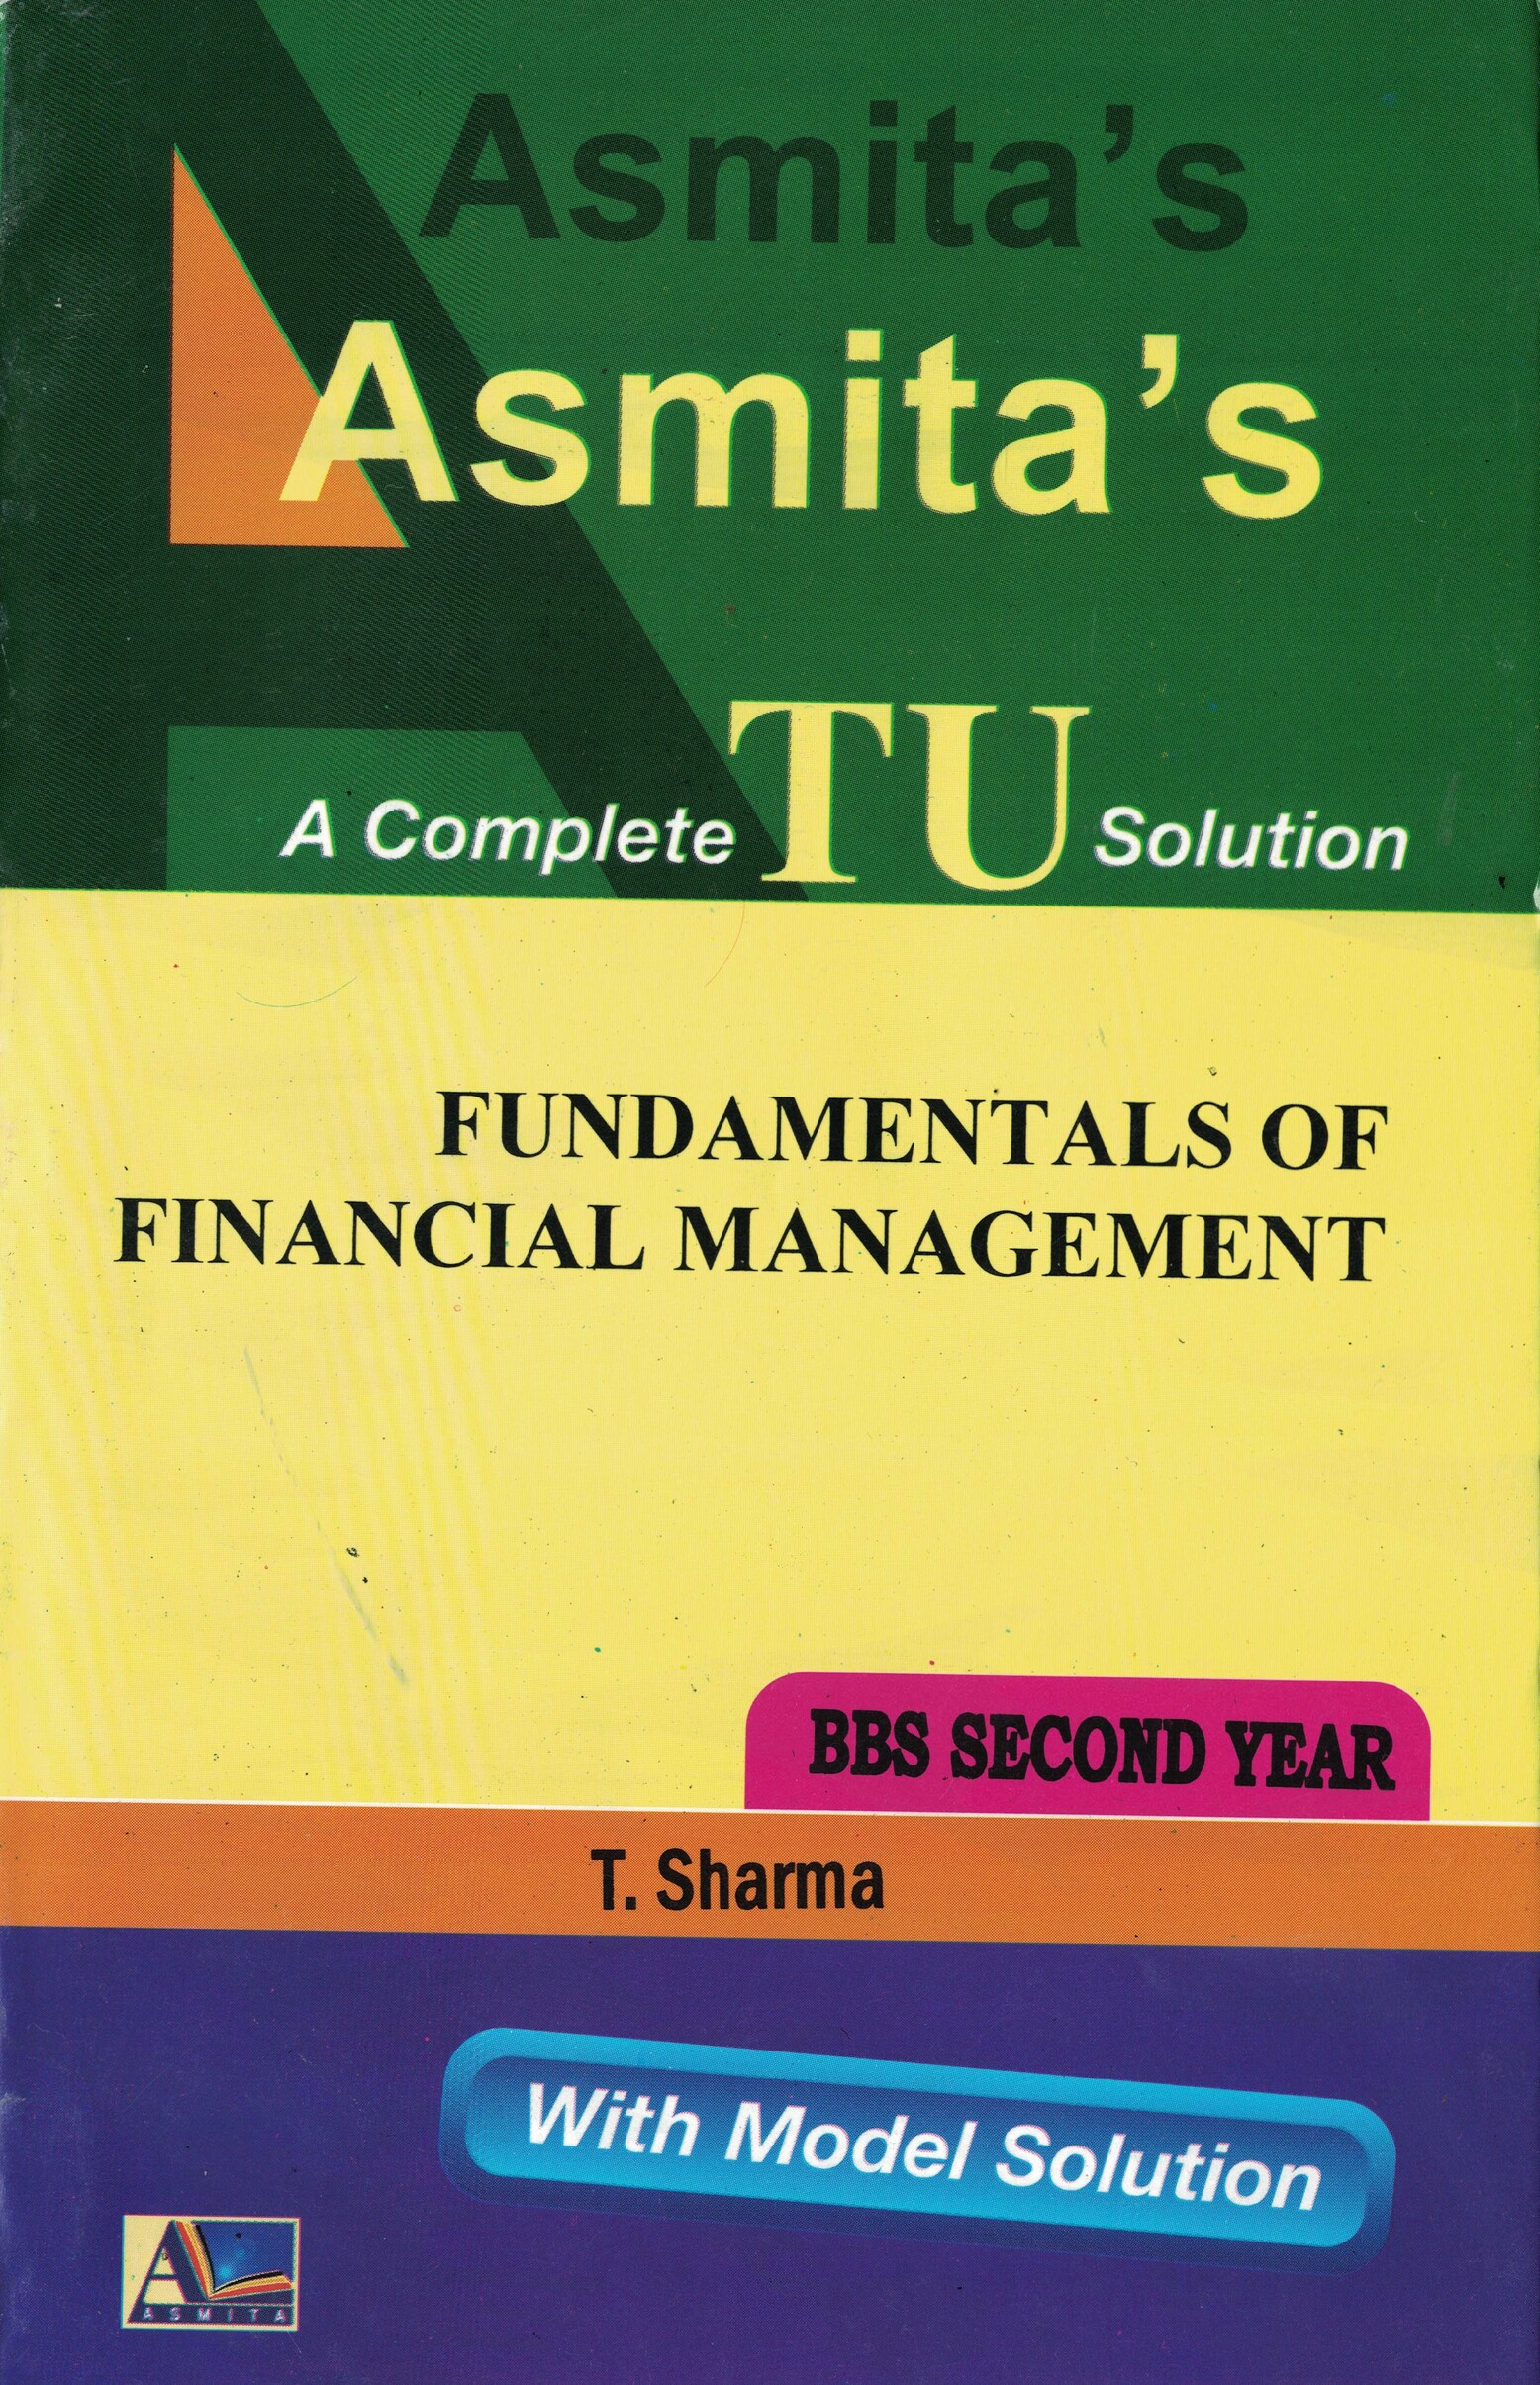 TU Solution of Fundamentals of Financial Management - BBS Second Year